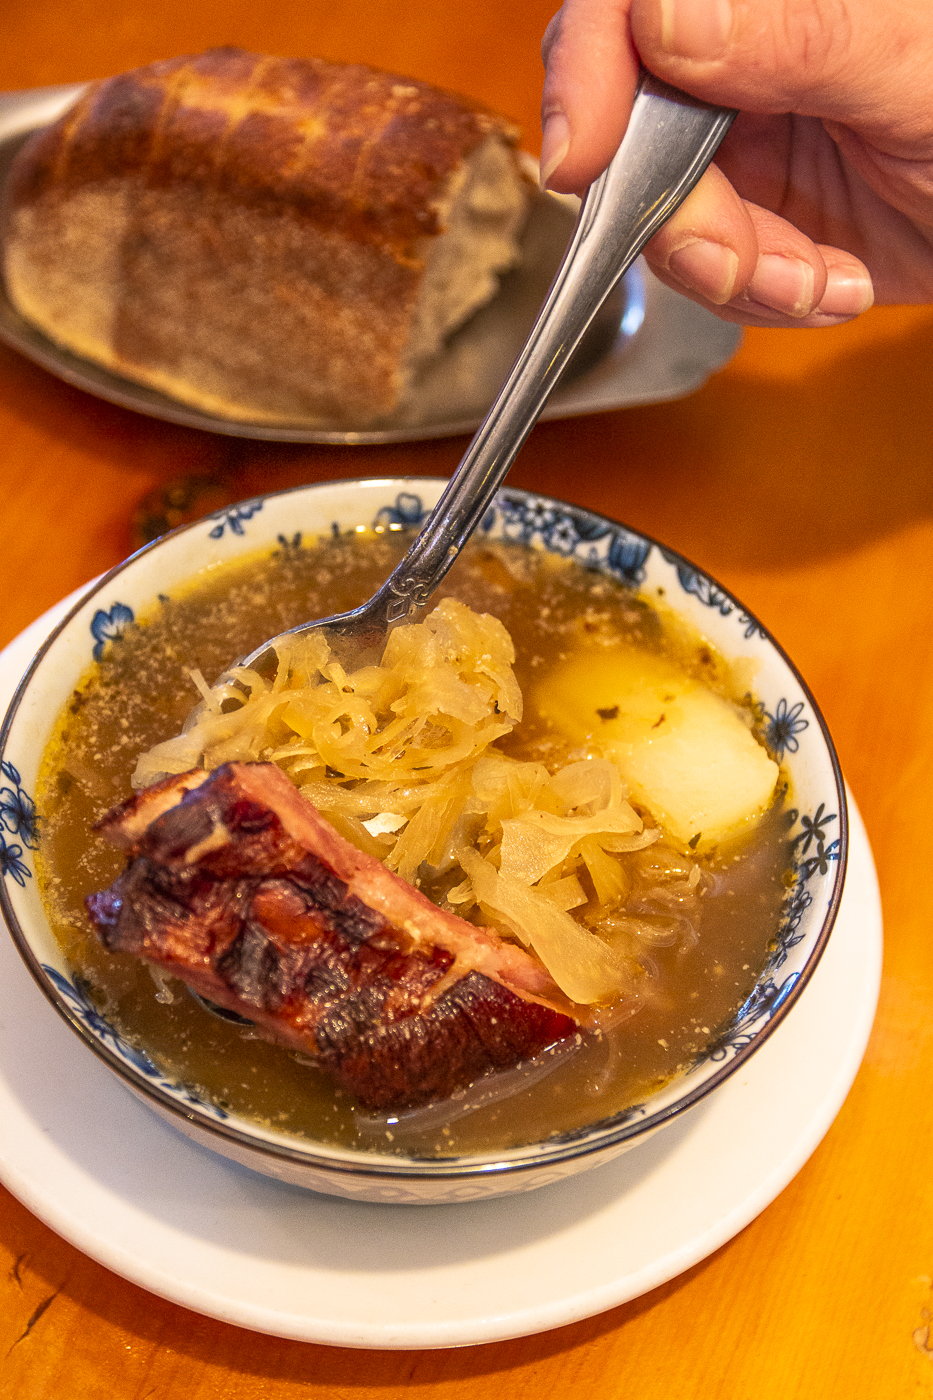 Traditional Polish sauerkraut soup with smoked rib meat at U Gazdy Restaurant in Wood Dale, IL.